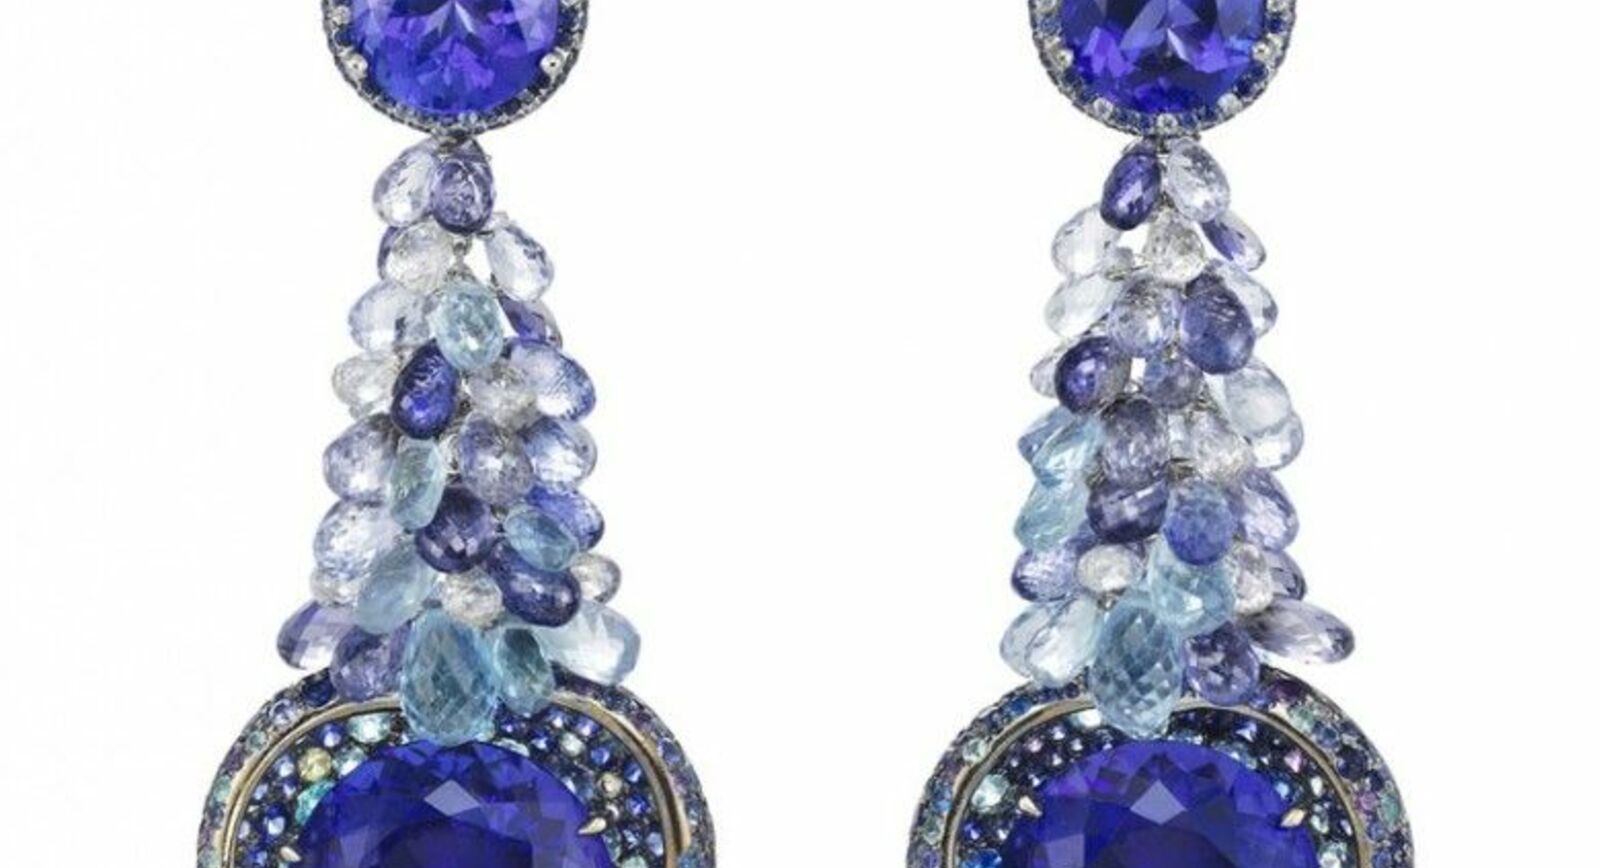 Anatomy of a Jewel: Red Carpet collection earrings by Chopard